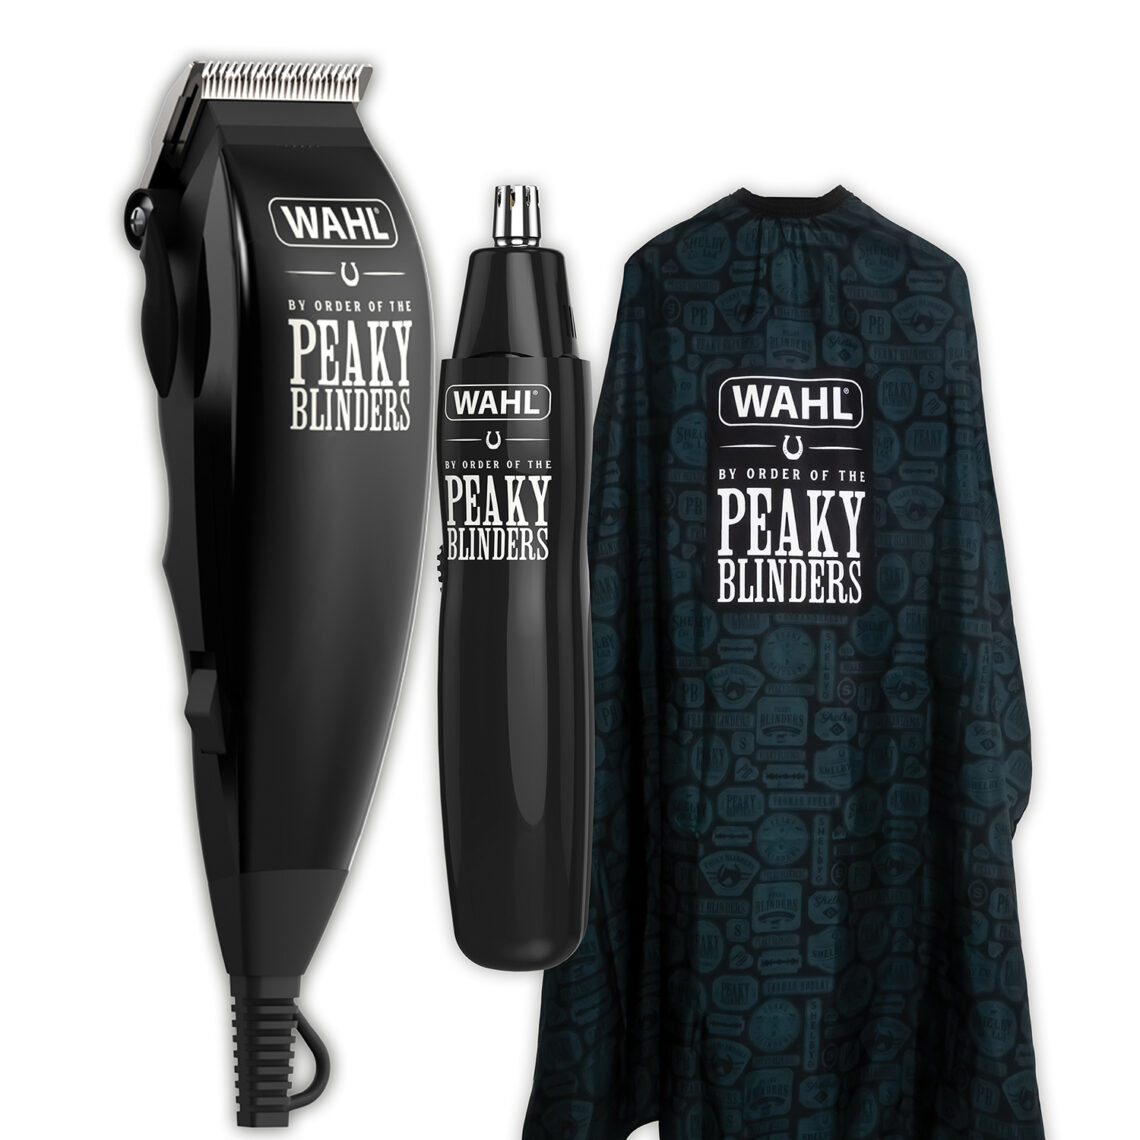 Hair Clipper & Personal Trimmer Kit